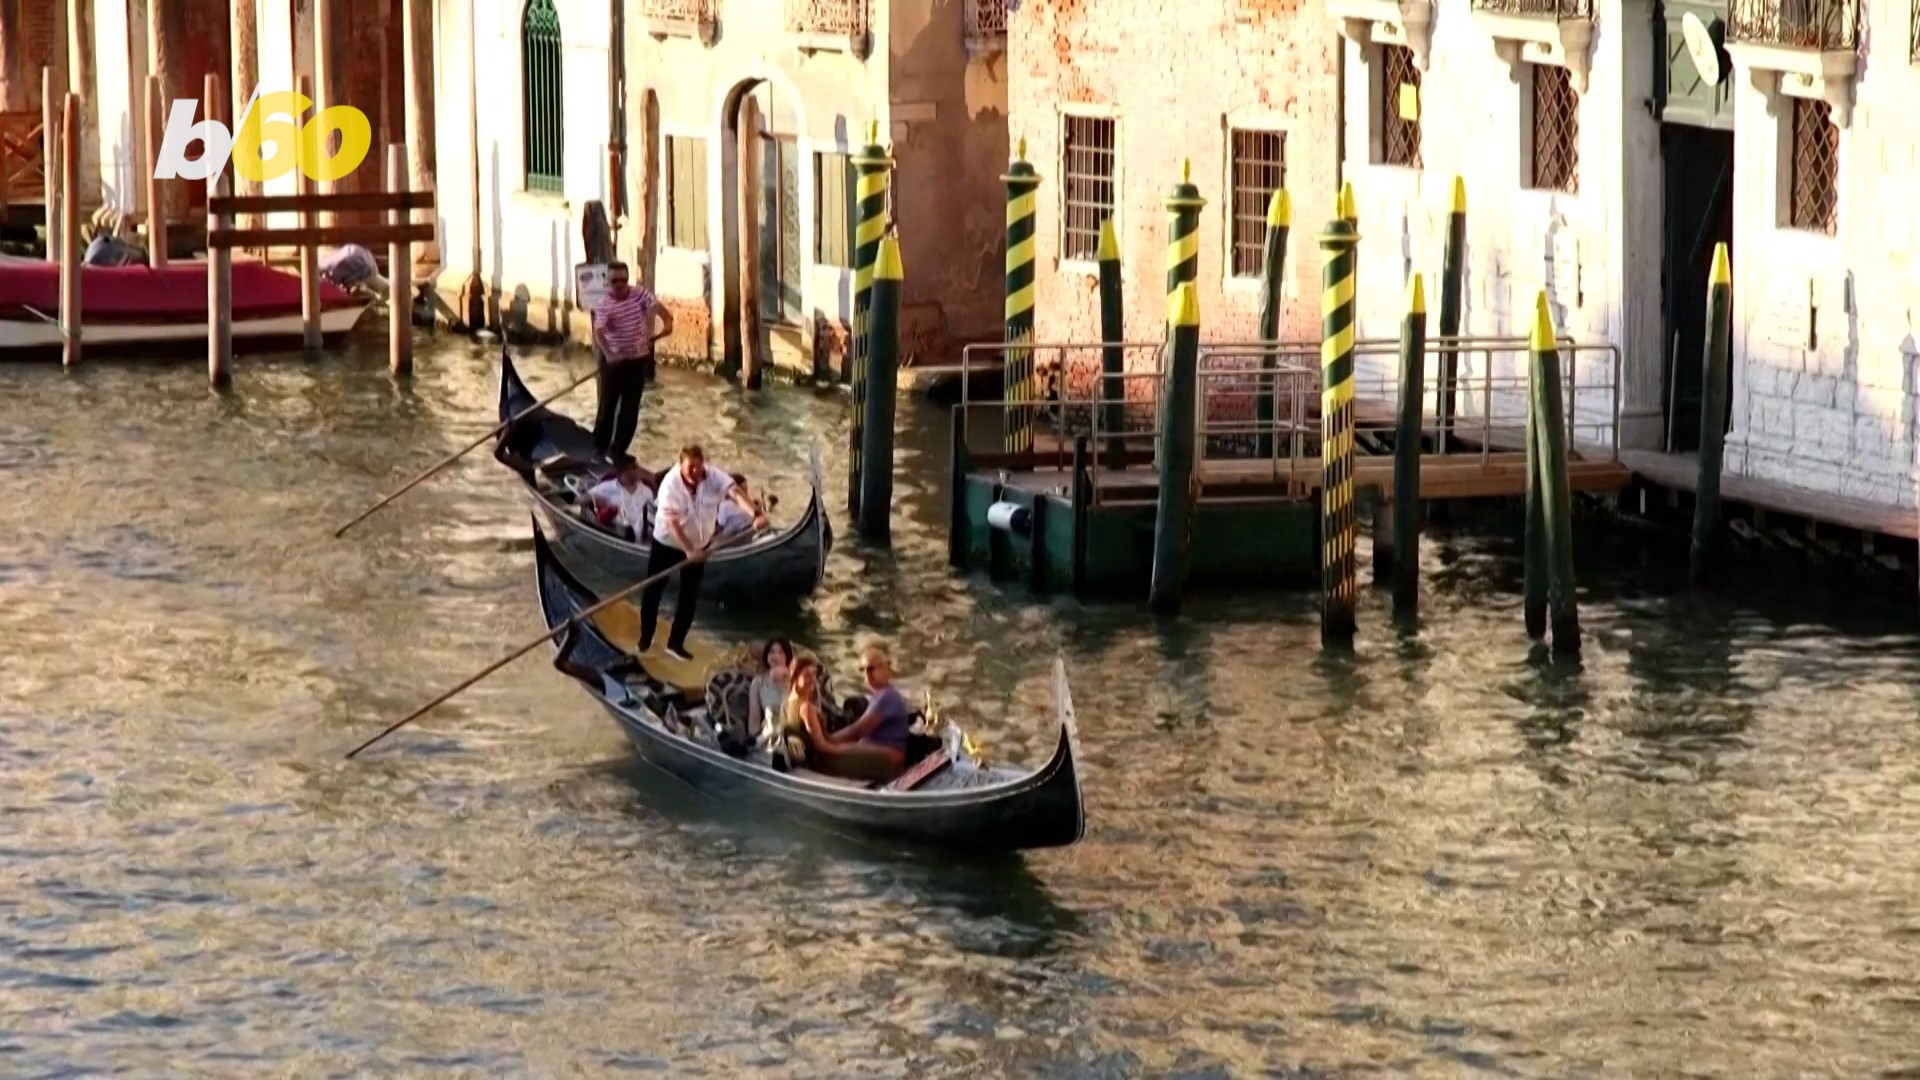 The Italian city of Venice is implementing an entrance fee and not everyone is thrilled. Yair Ben-Dor has more.